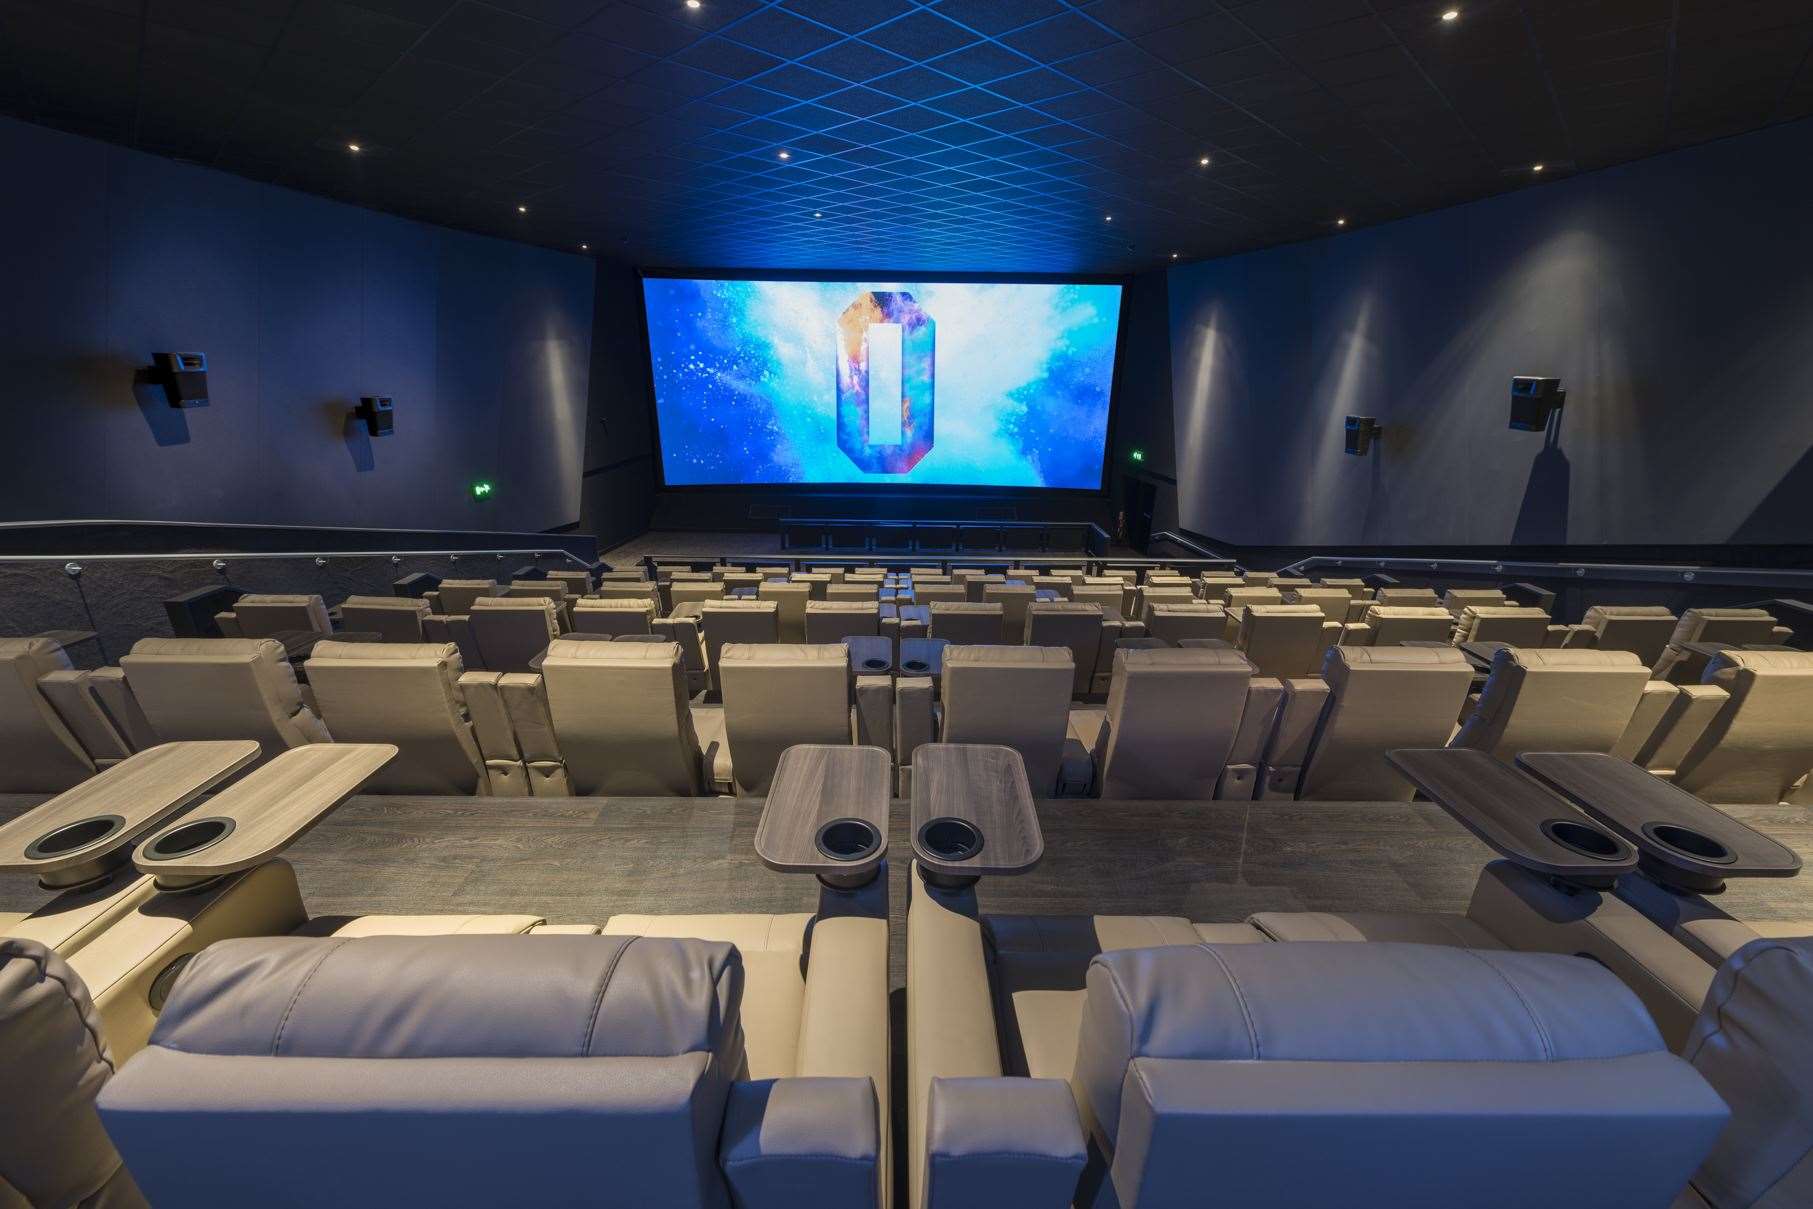 The Odeon Luxe has upgraded seating